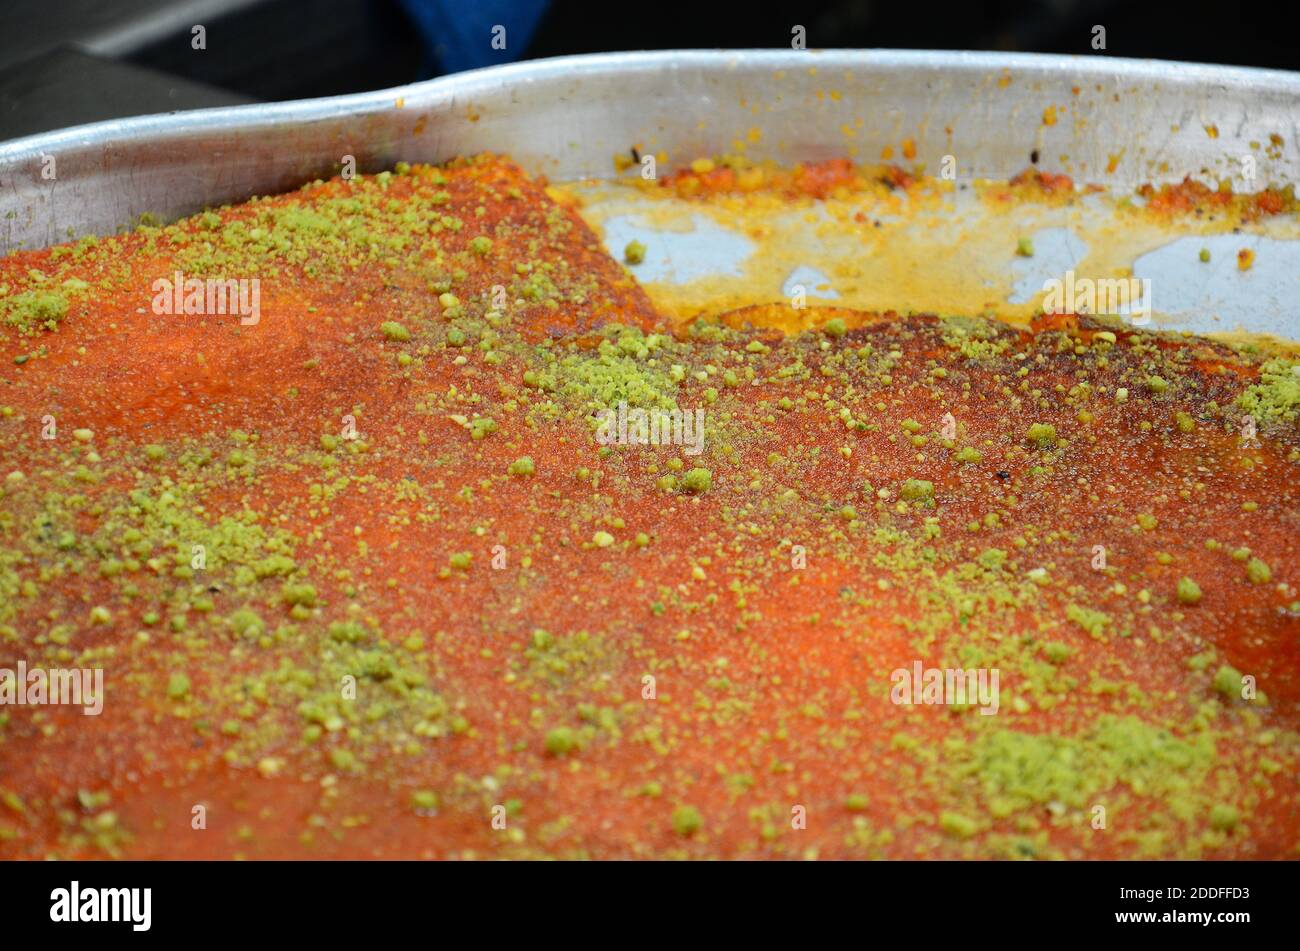 Kanafeh, traditional Middle Eastern dessert made with cheese, in a  siniyyeh large metal tray. Amman, Jordan Stock Photo